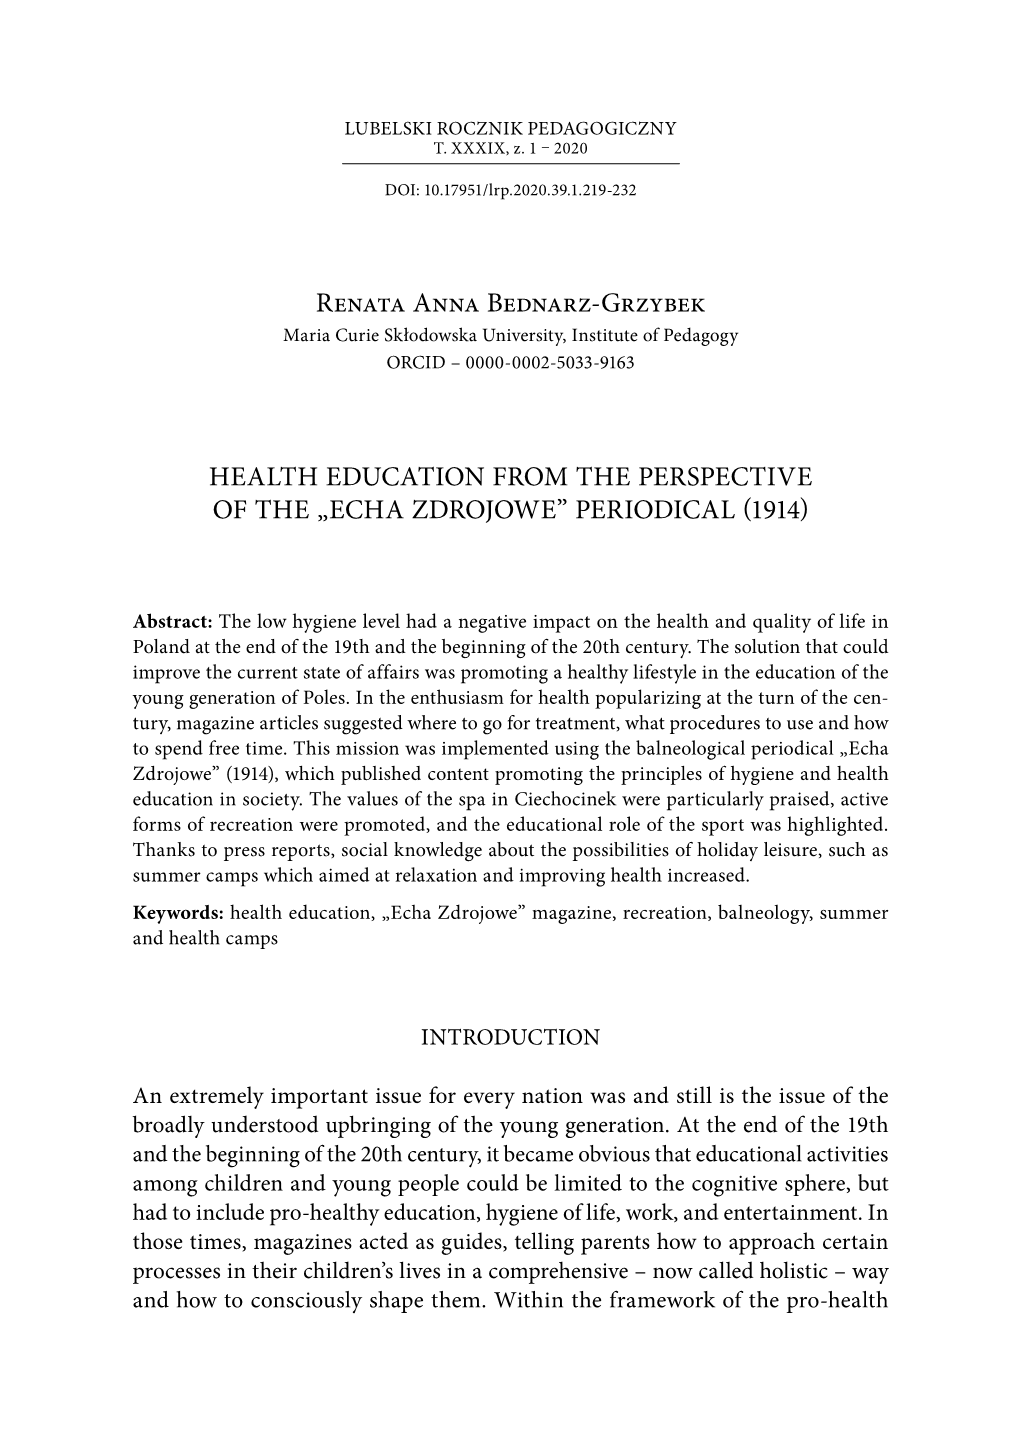 Renata Anna Bednarz-Grzybek Health Education from the Perspective of the „Echa Zdrojowe” Periodical (1914)